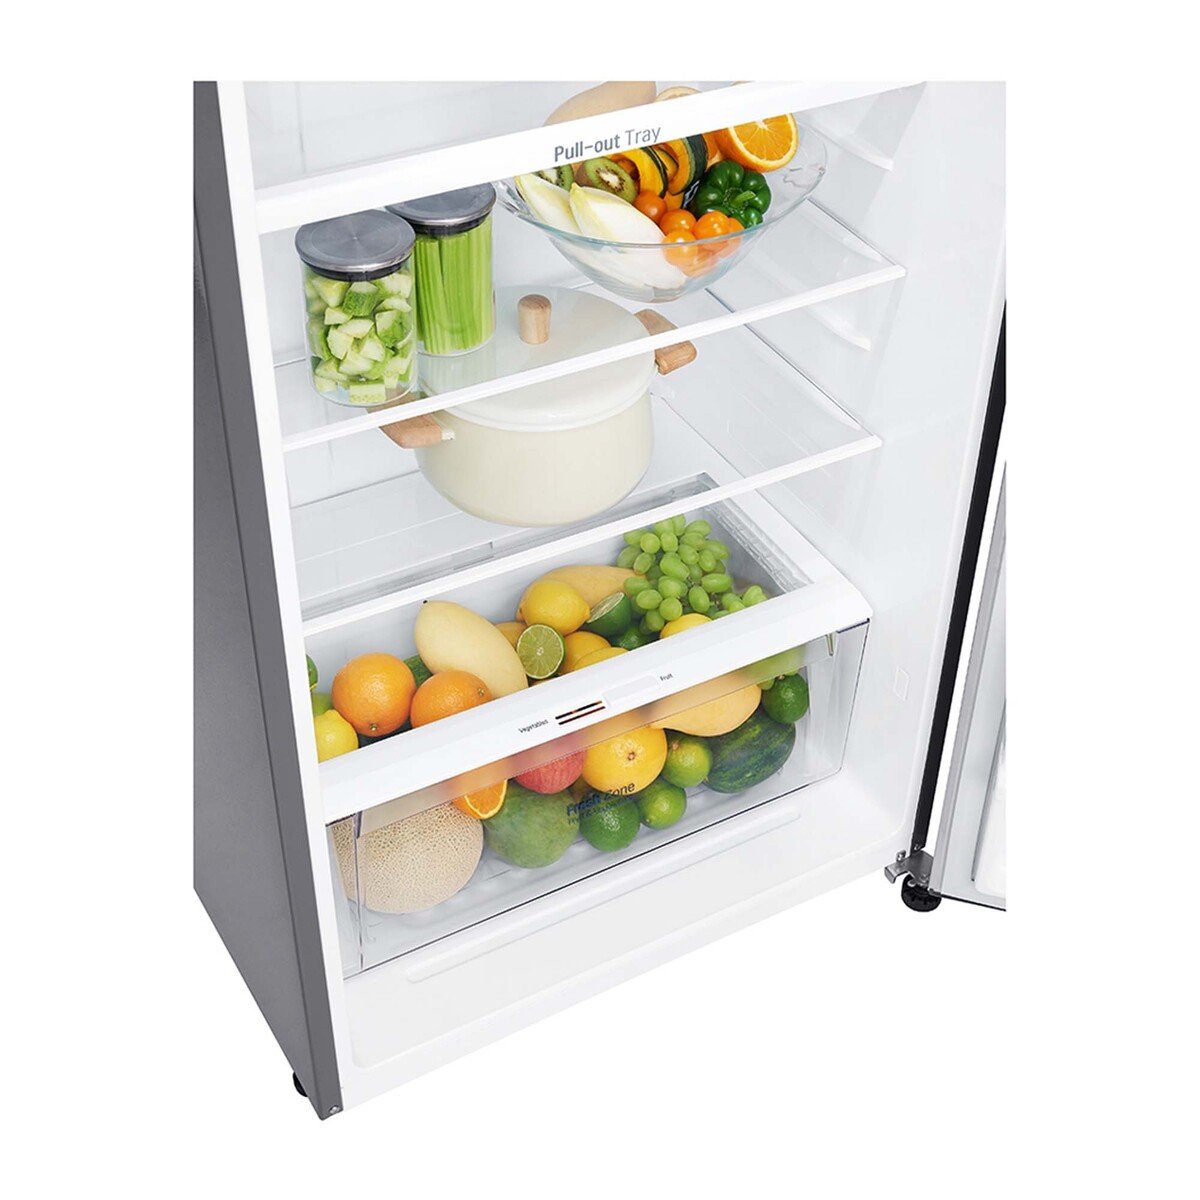 LG Double Door Refrigerator GN-B492SLCL 427LTR, Smart Inverter Compressor, Pull-out Tray, Big Size Veggie Box